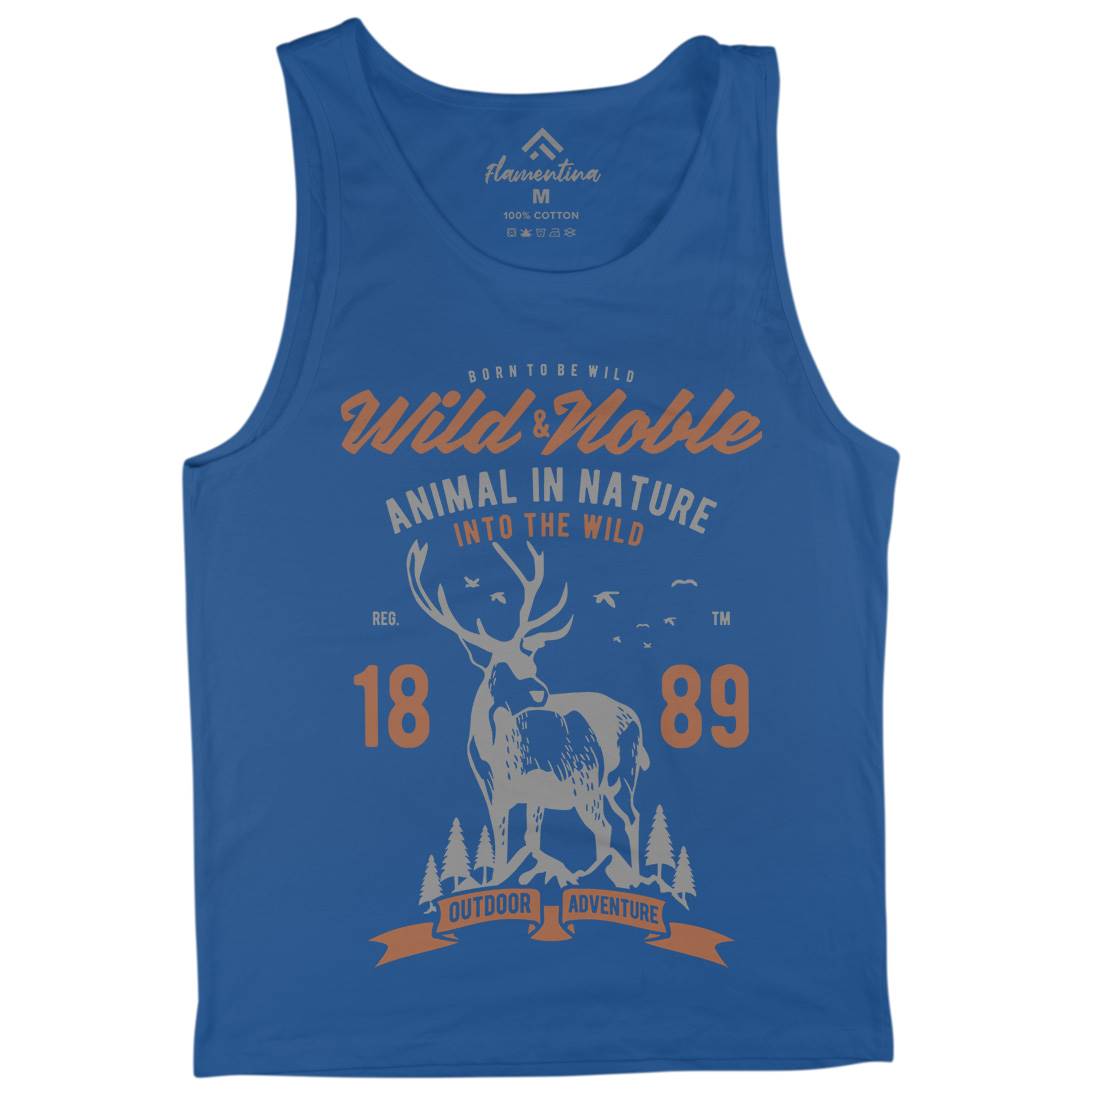 Wild And Noble Mens Tank Top Vest Animals B472